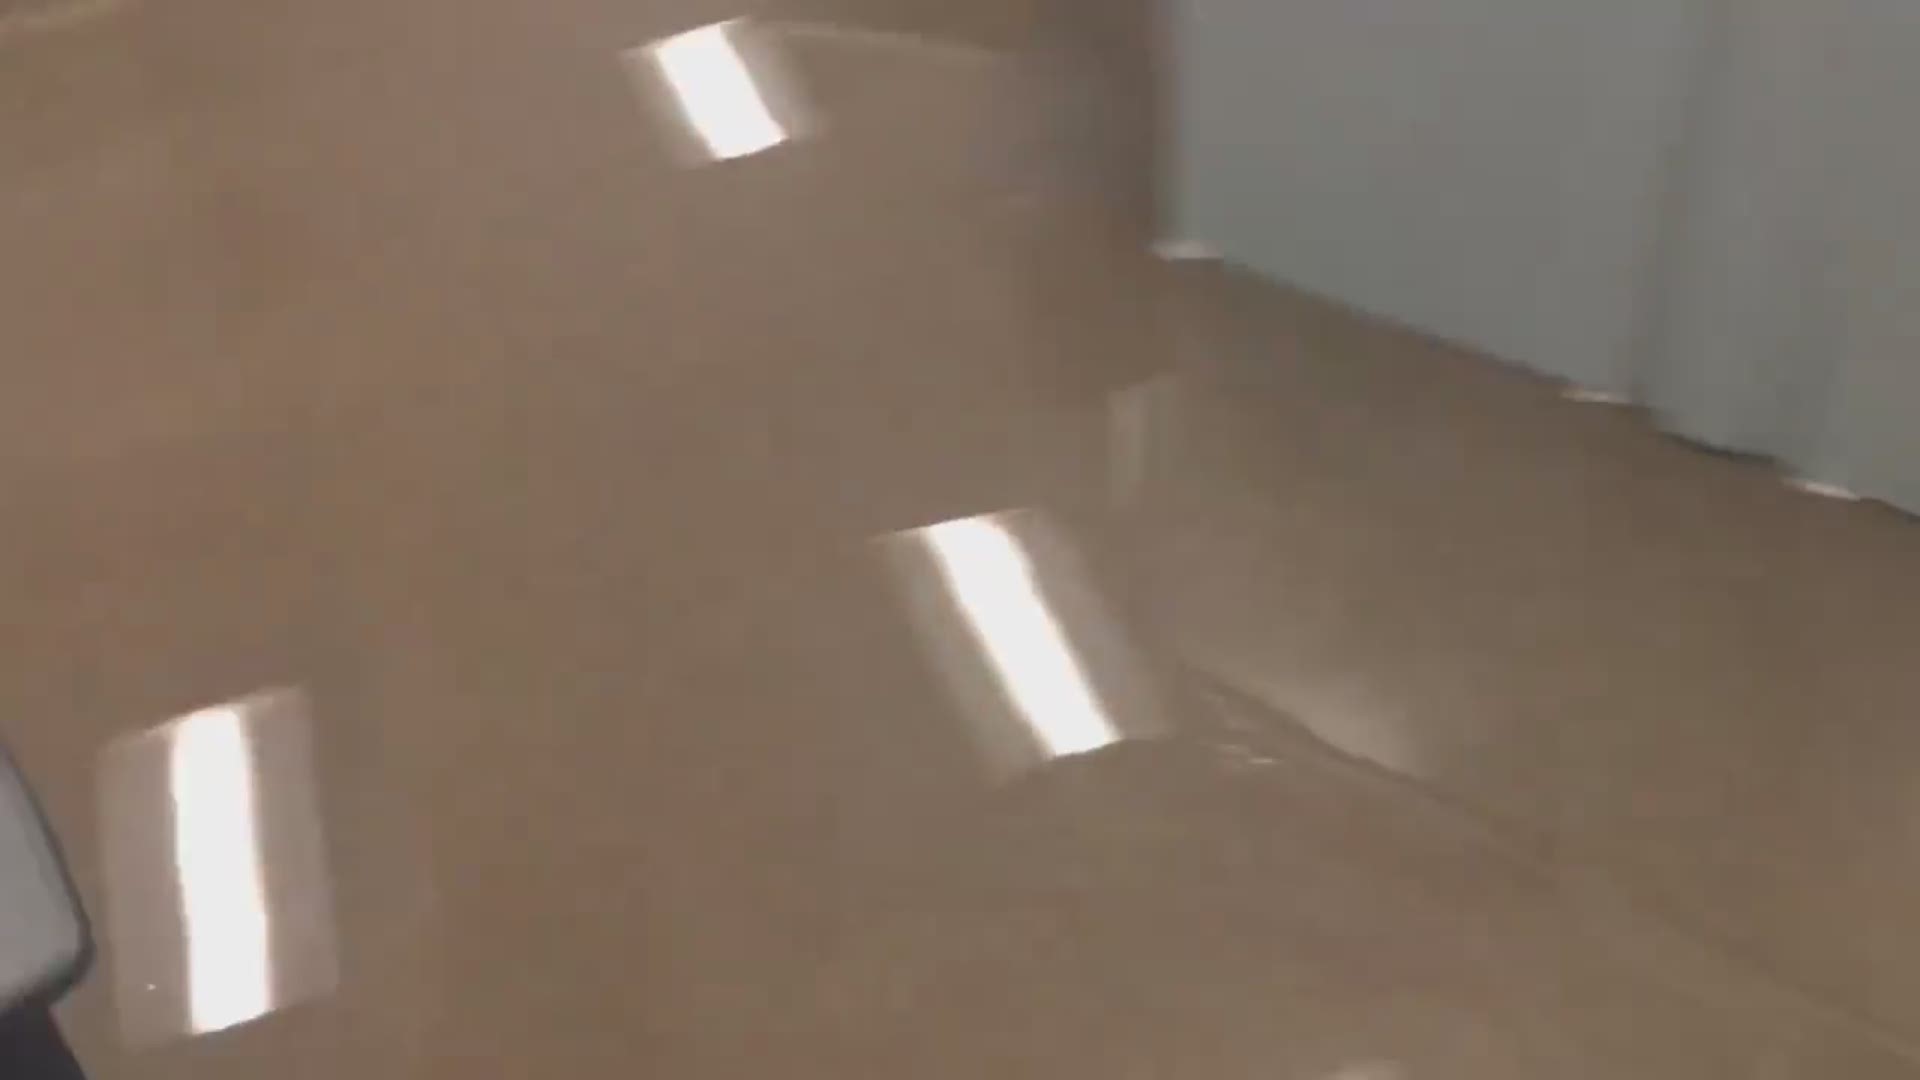 Flooding inside KBMT forces station reporters and employees to higher ground.